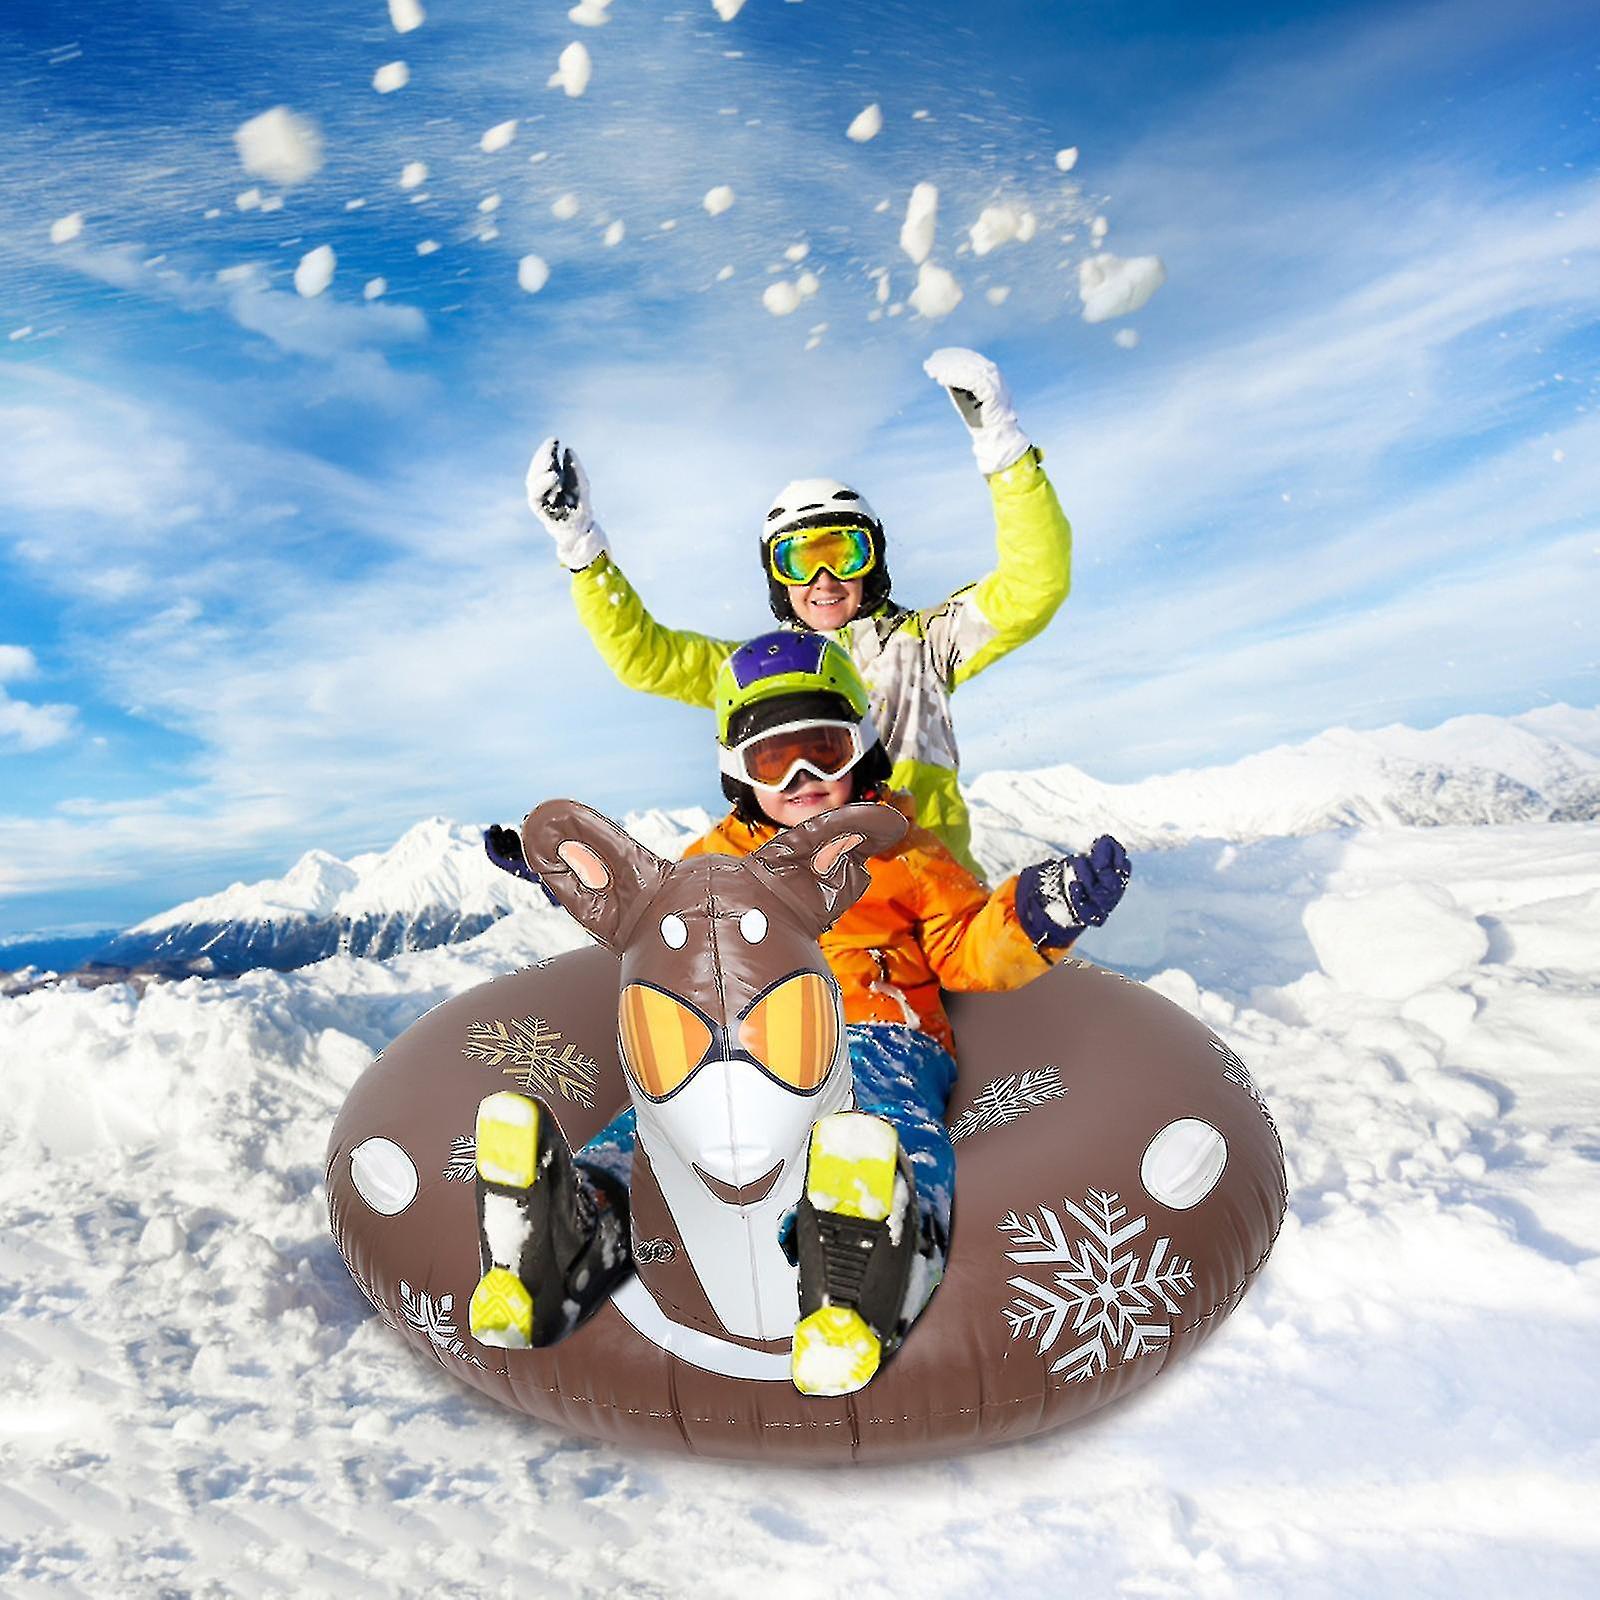 Miman Pvc Cold-resistant And Wear-resistant Material Inflatable Snowboard Snowman Ski Ring Christmas Sleigh Ski